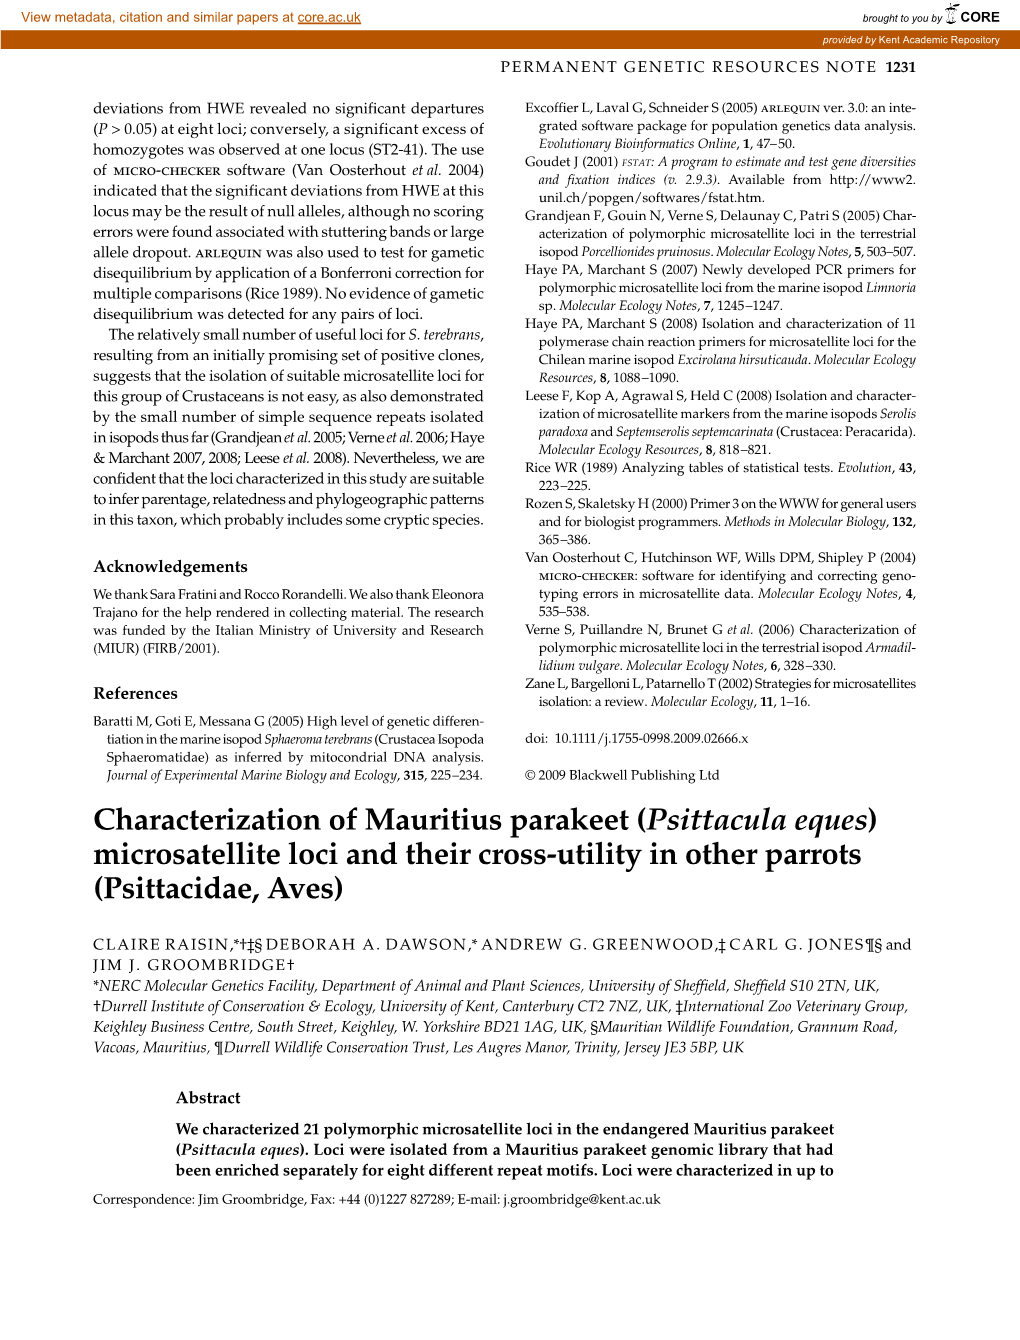 Characterization of Mauritius Parakeet (Psittacula Eques) Microsatellite Loci and Their Cross-Utility in Other Parrots (Psittacidae, Aves)